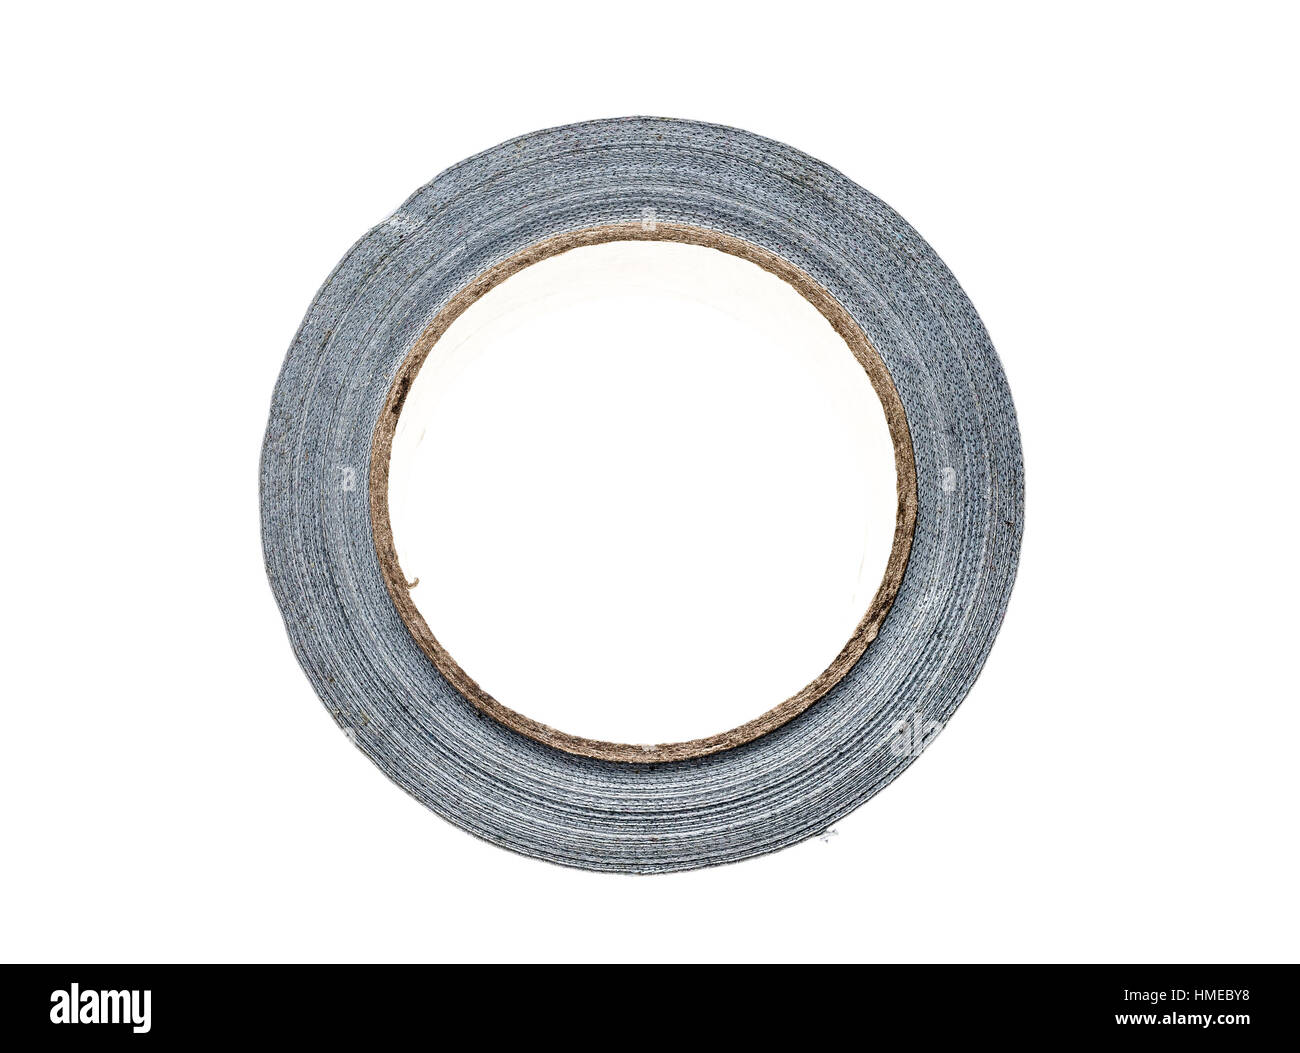 Silver duct gaffer repair tape roll isolated on white. Close up of sticky reel of adhesive repair tape on white background. Stock Photo